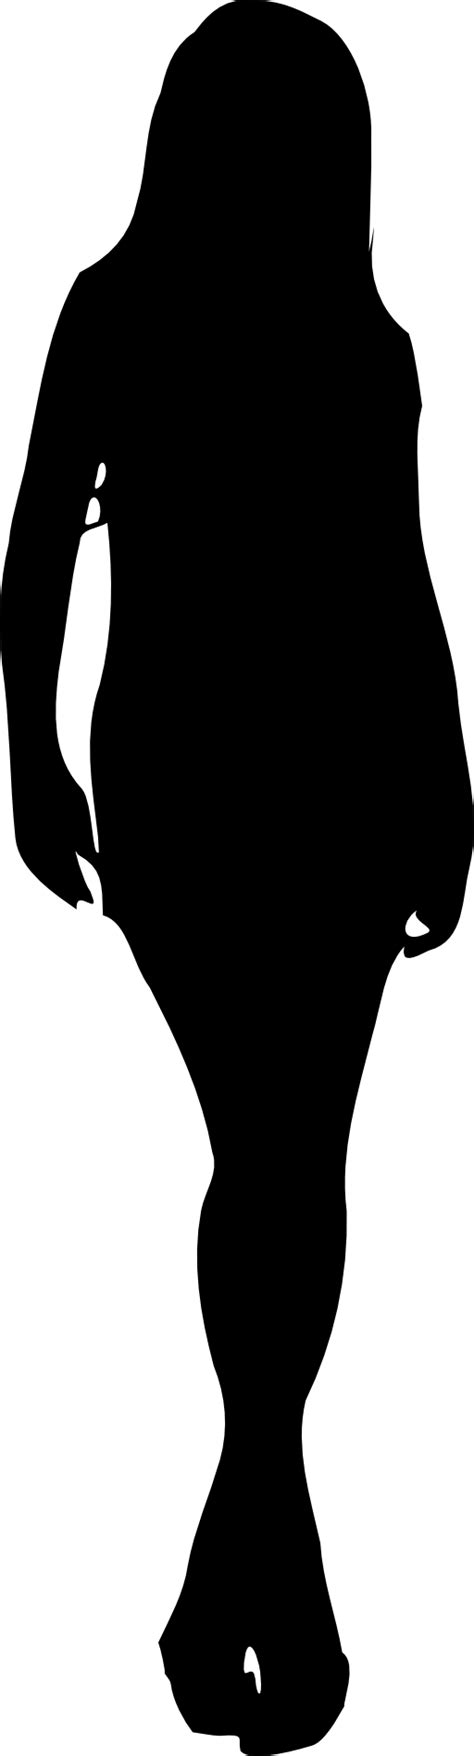 Woman Silhouette 10 Clipart I2clipart Royalty Free Public Domain